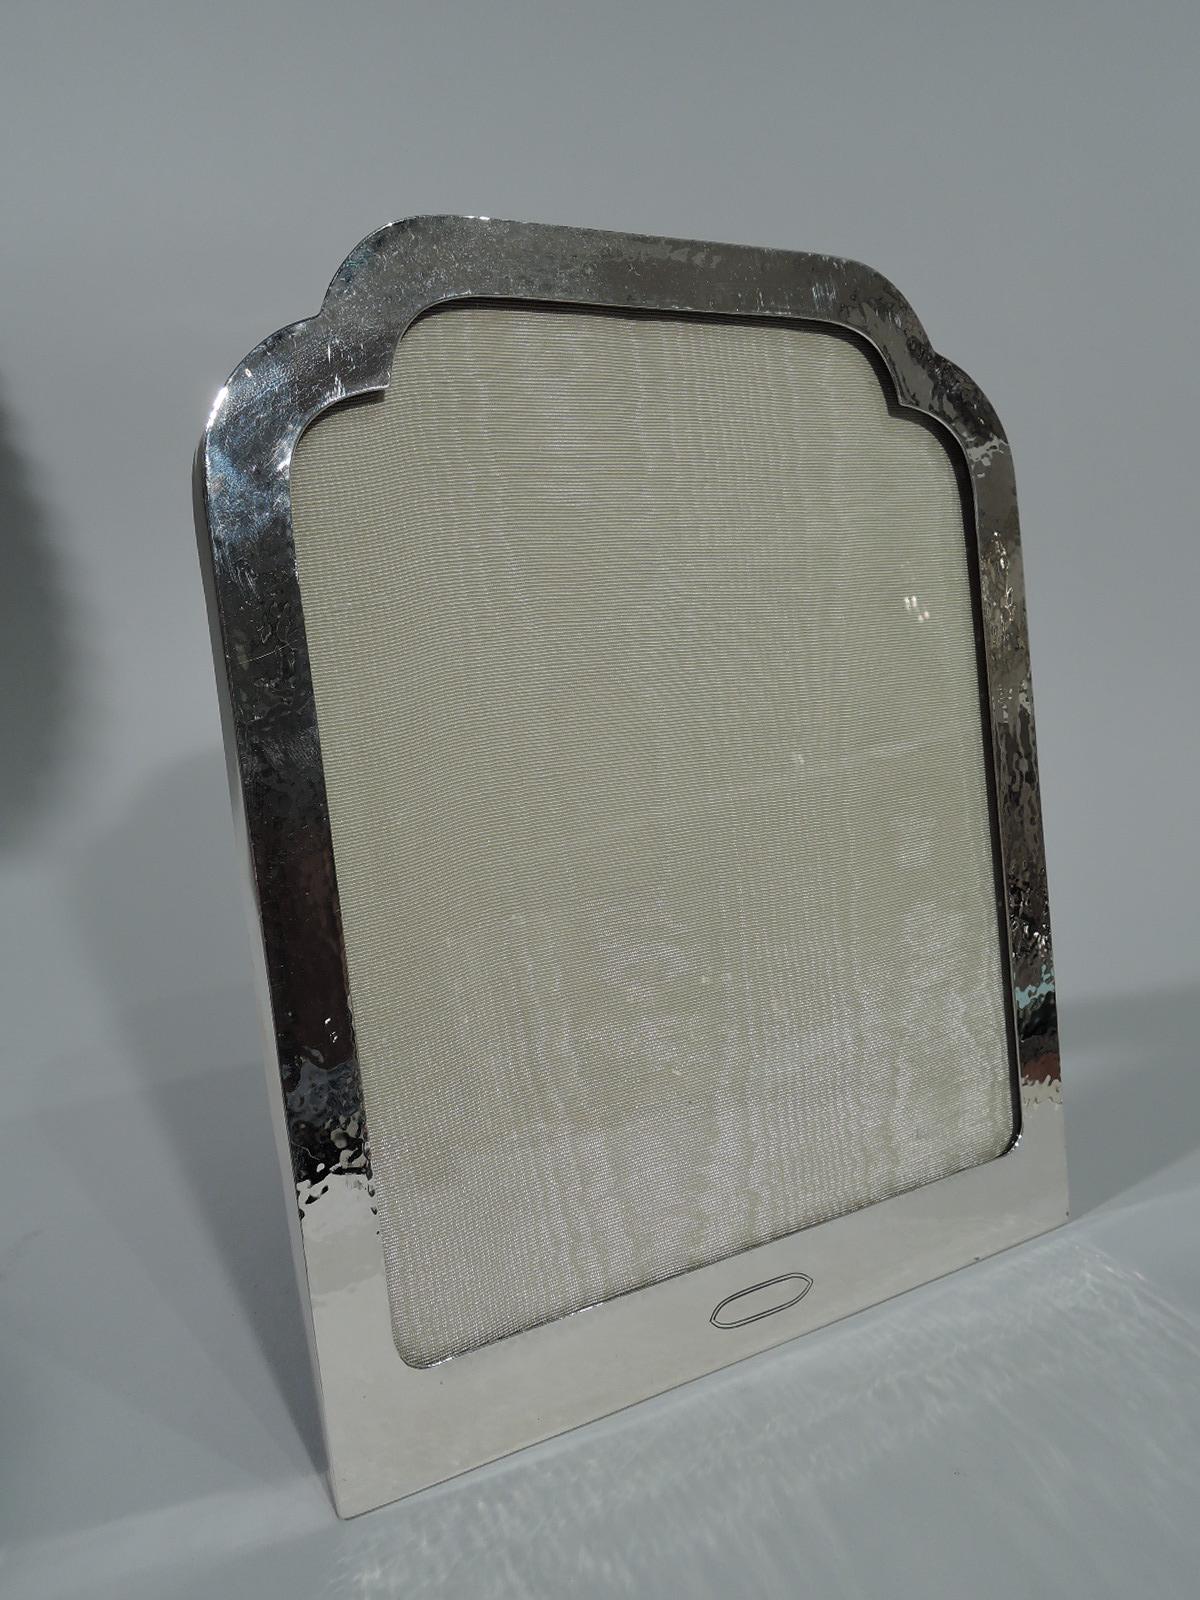 Craftsman sterling silver picture frame. Made by Watrous (a division of International) in Wallingford, Conn., circa 1920. Flat and rectangular surround with arched trefoil top. Shaped tubular cartouche (vacant) at bottom. Visible hand hammering.